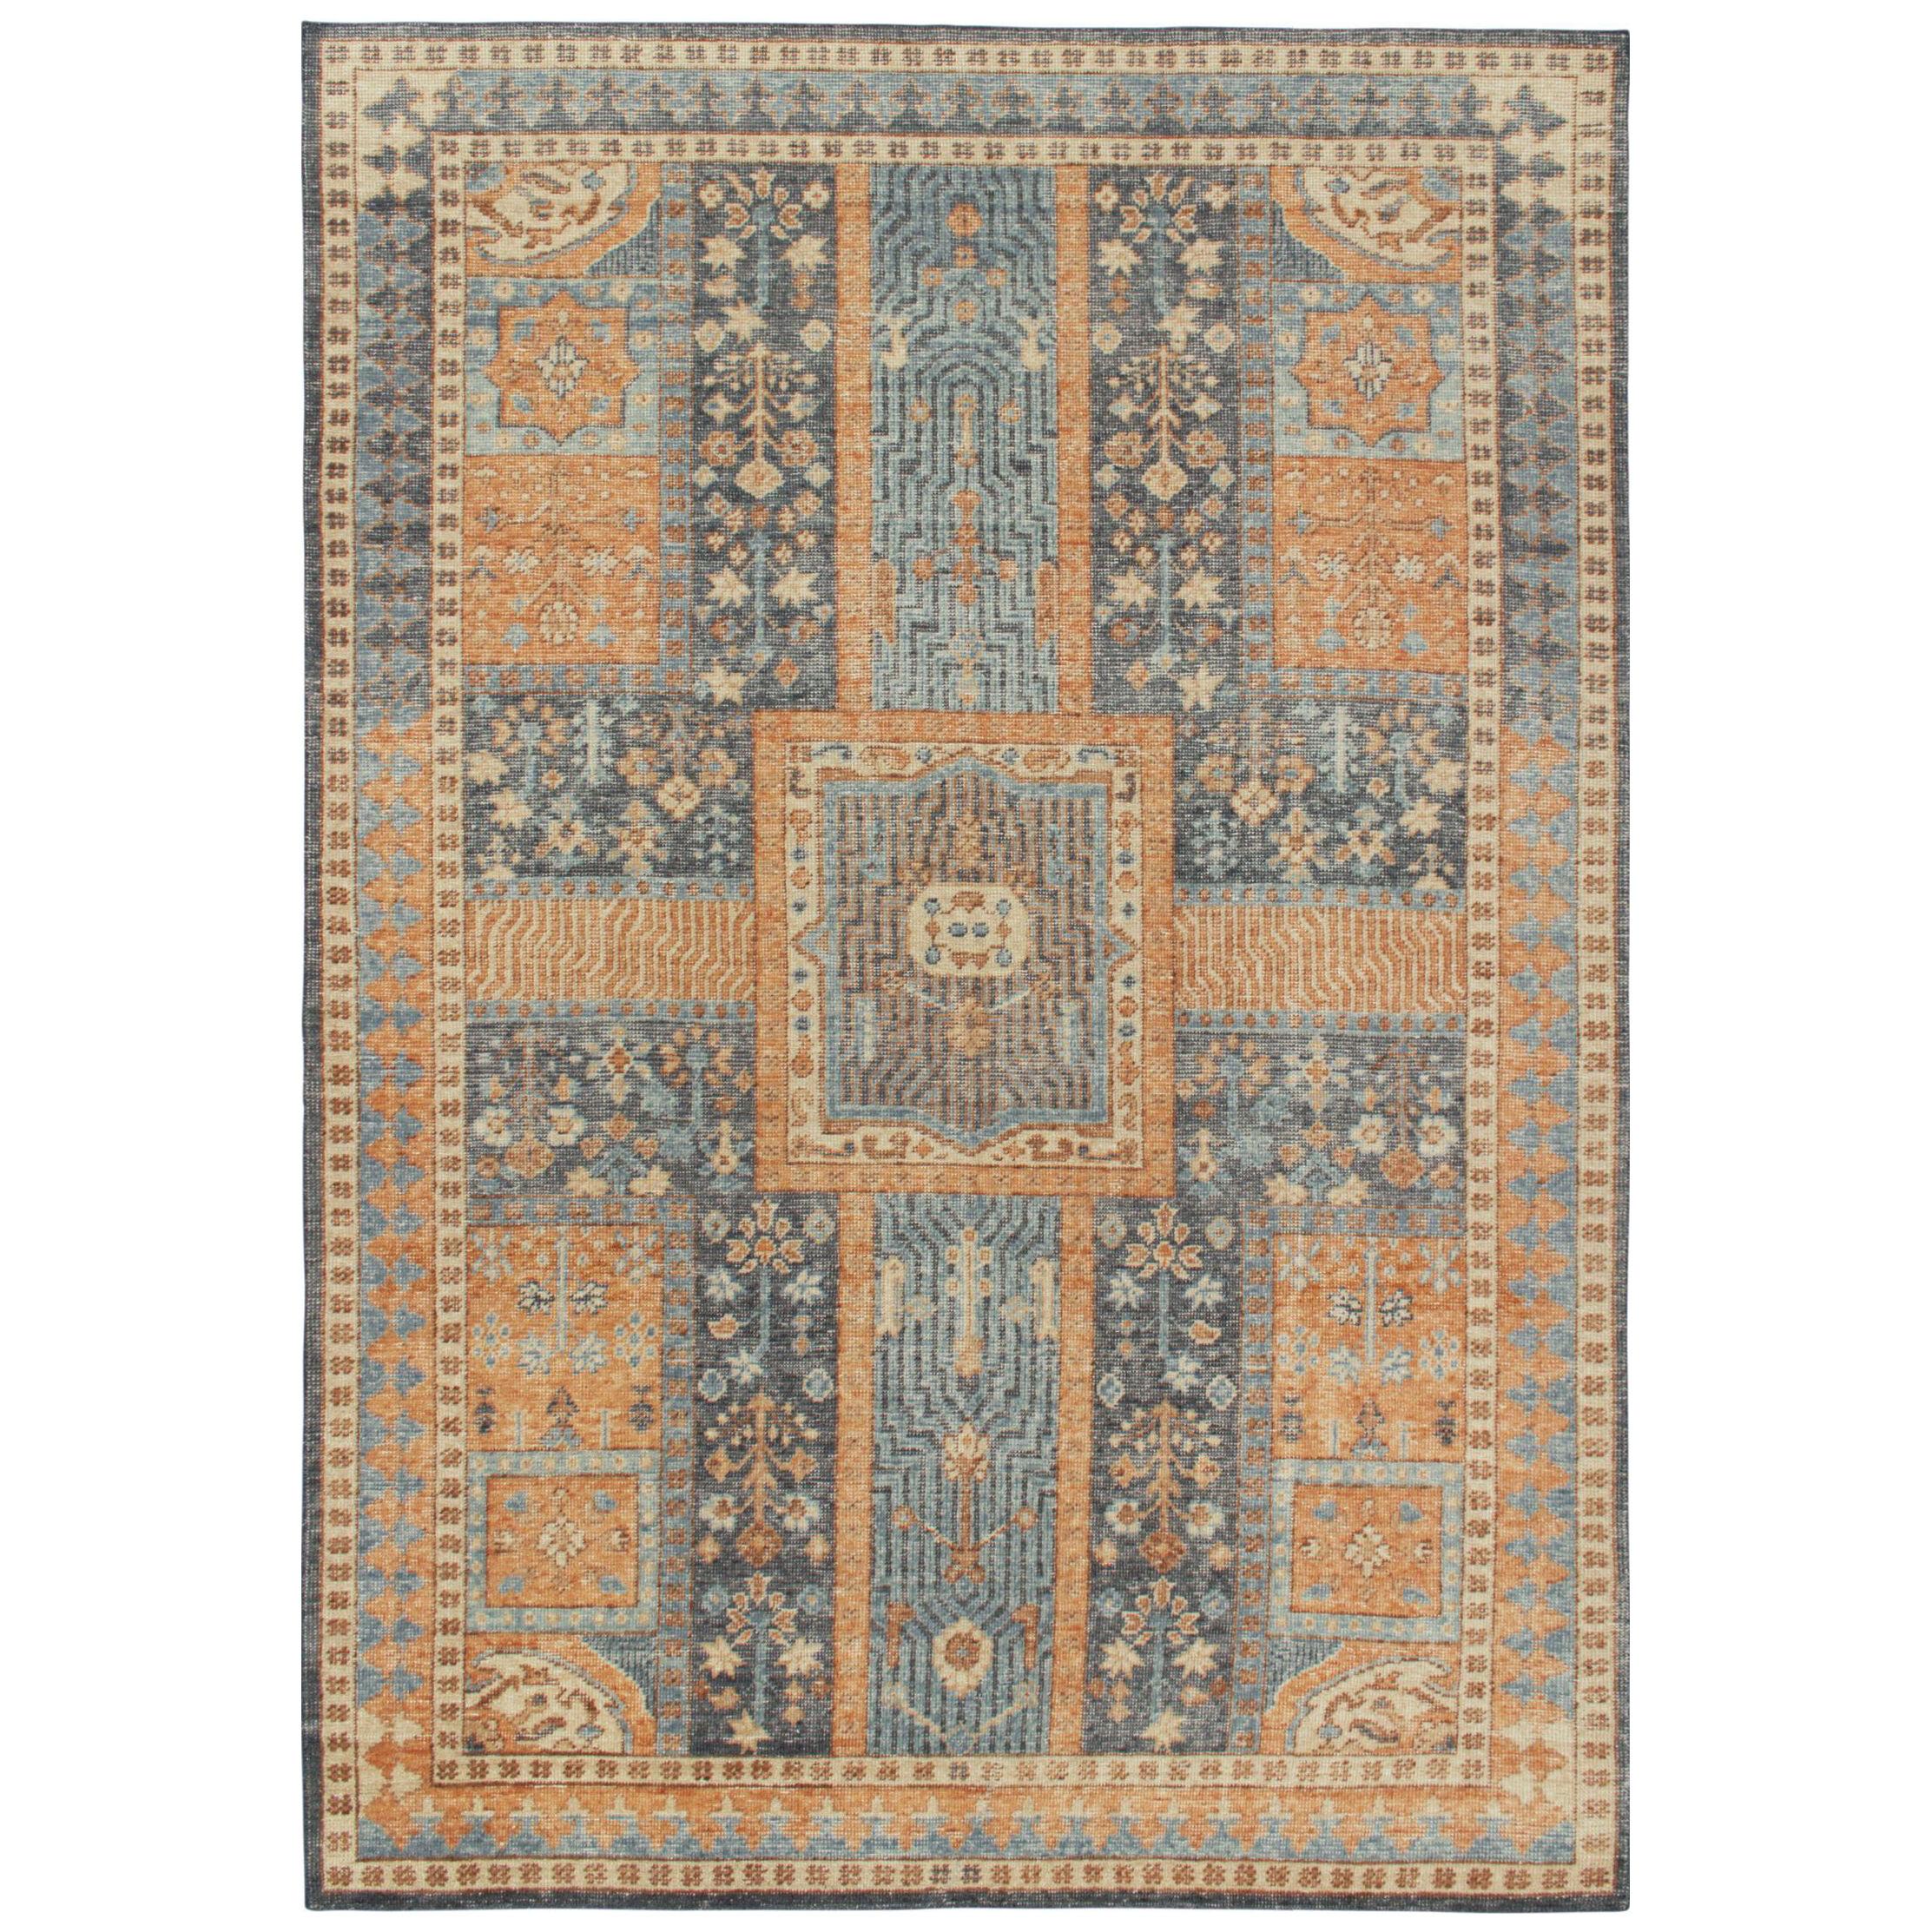 Antique Persian Style Distressed Rug in Blue, Gold Garden Pattern by Rug & Kilim